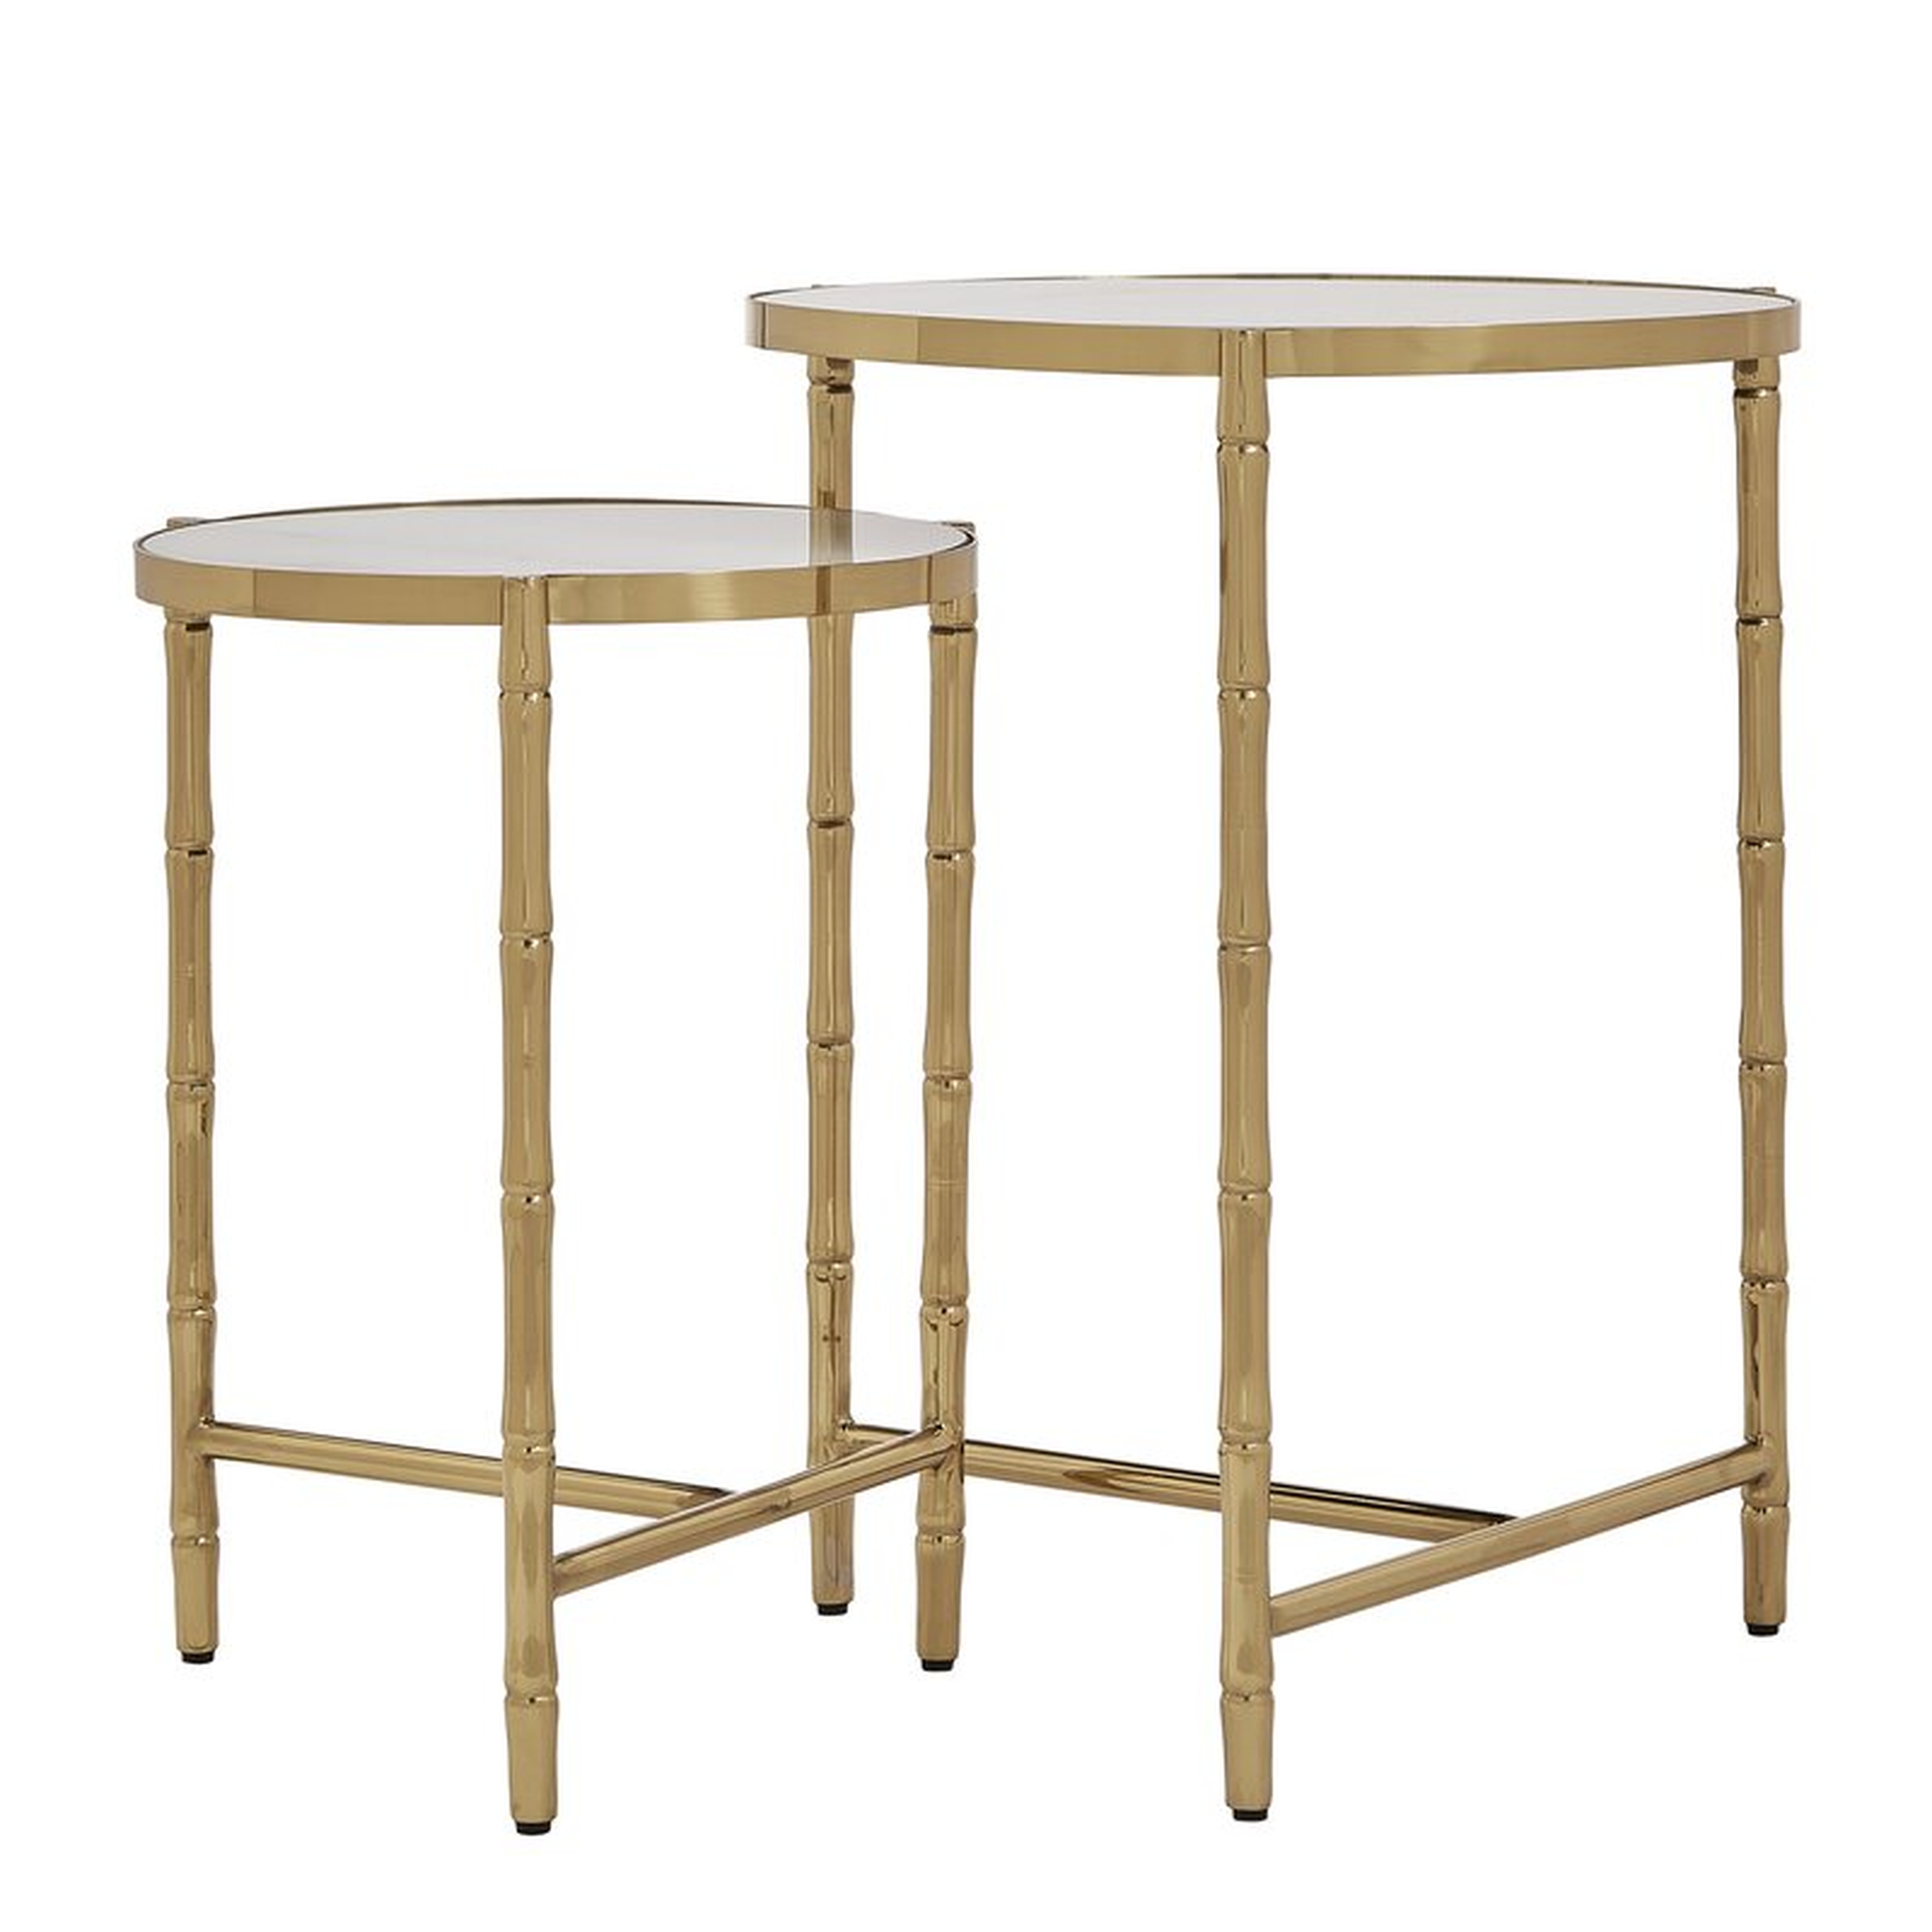 Conlon Round Bamboo-look Stainless Steel Marbled 2 Piece Nesting Tables - Wayfair